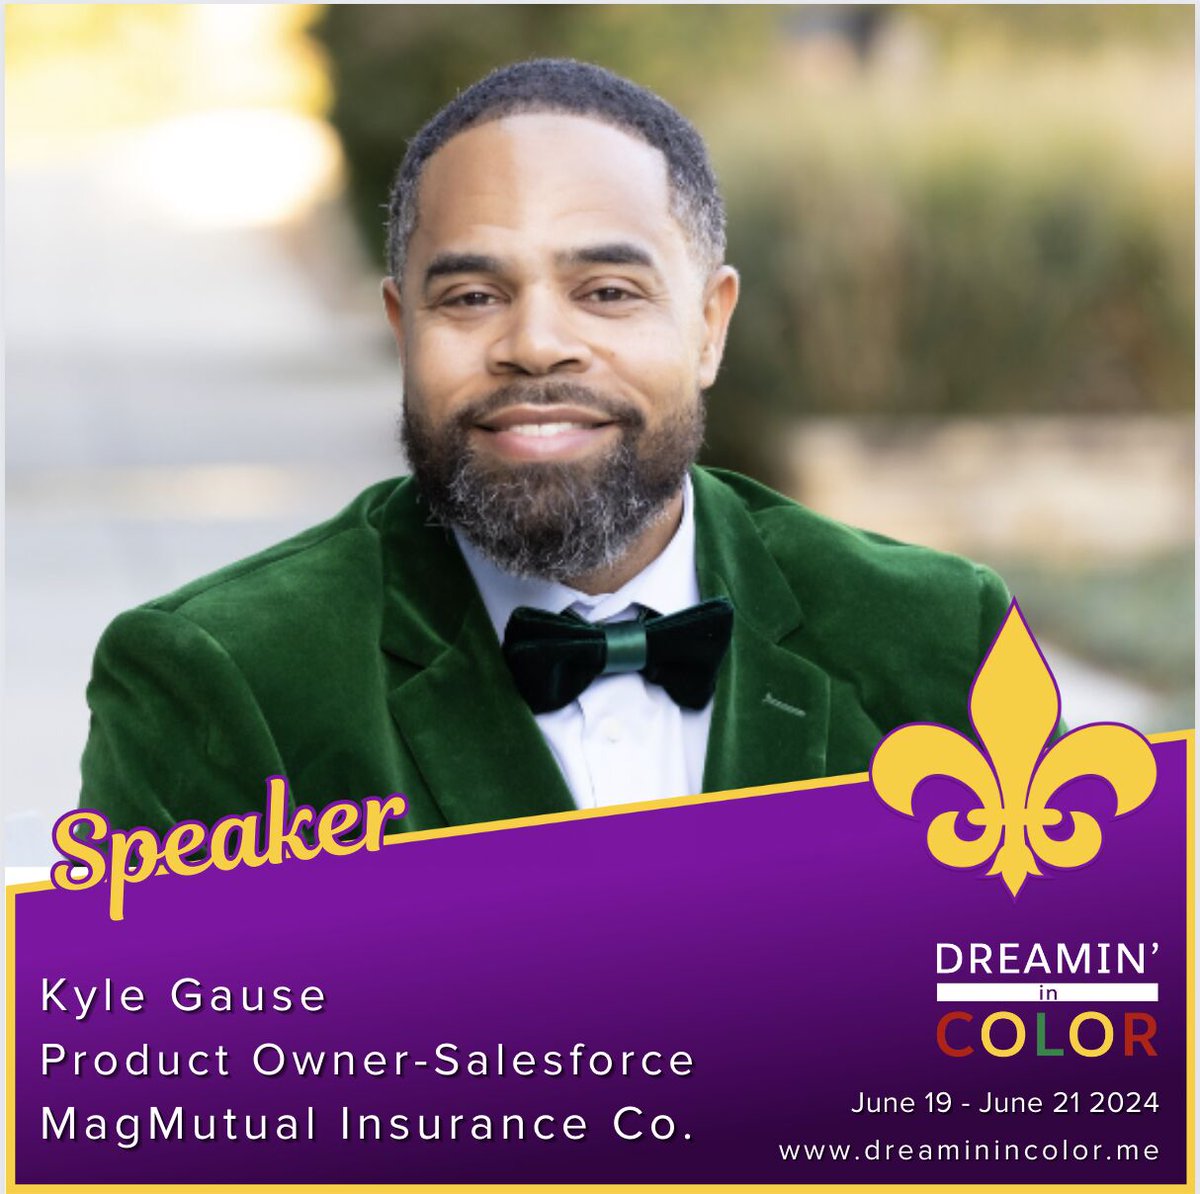 🌟 Exciting news for #Salesforce enthusiasts! Join @ktgthinks at Dreamin' In Color conference for a deep dive into Business Process Mapping using Lucid Charts. Elevate your skills and optimize your projects! Register now: DreaminInColor.me 🚀 #DreaminInColor #LucidCharts